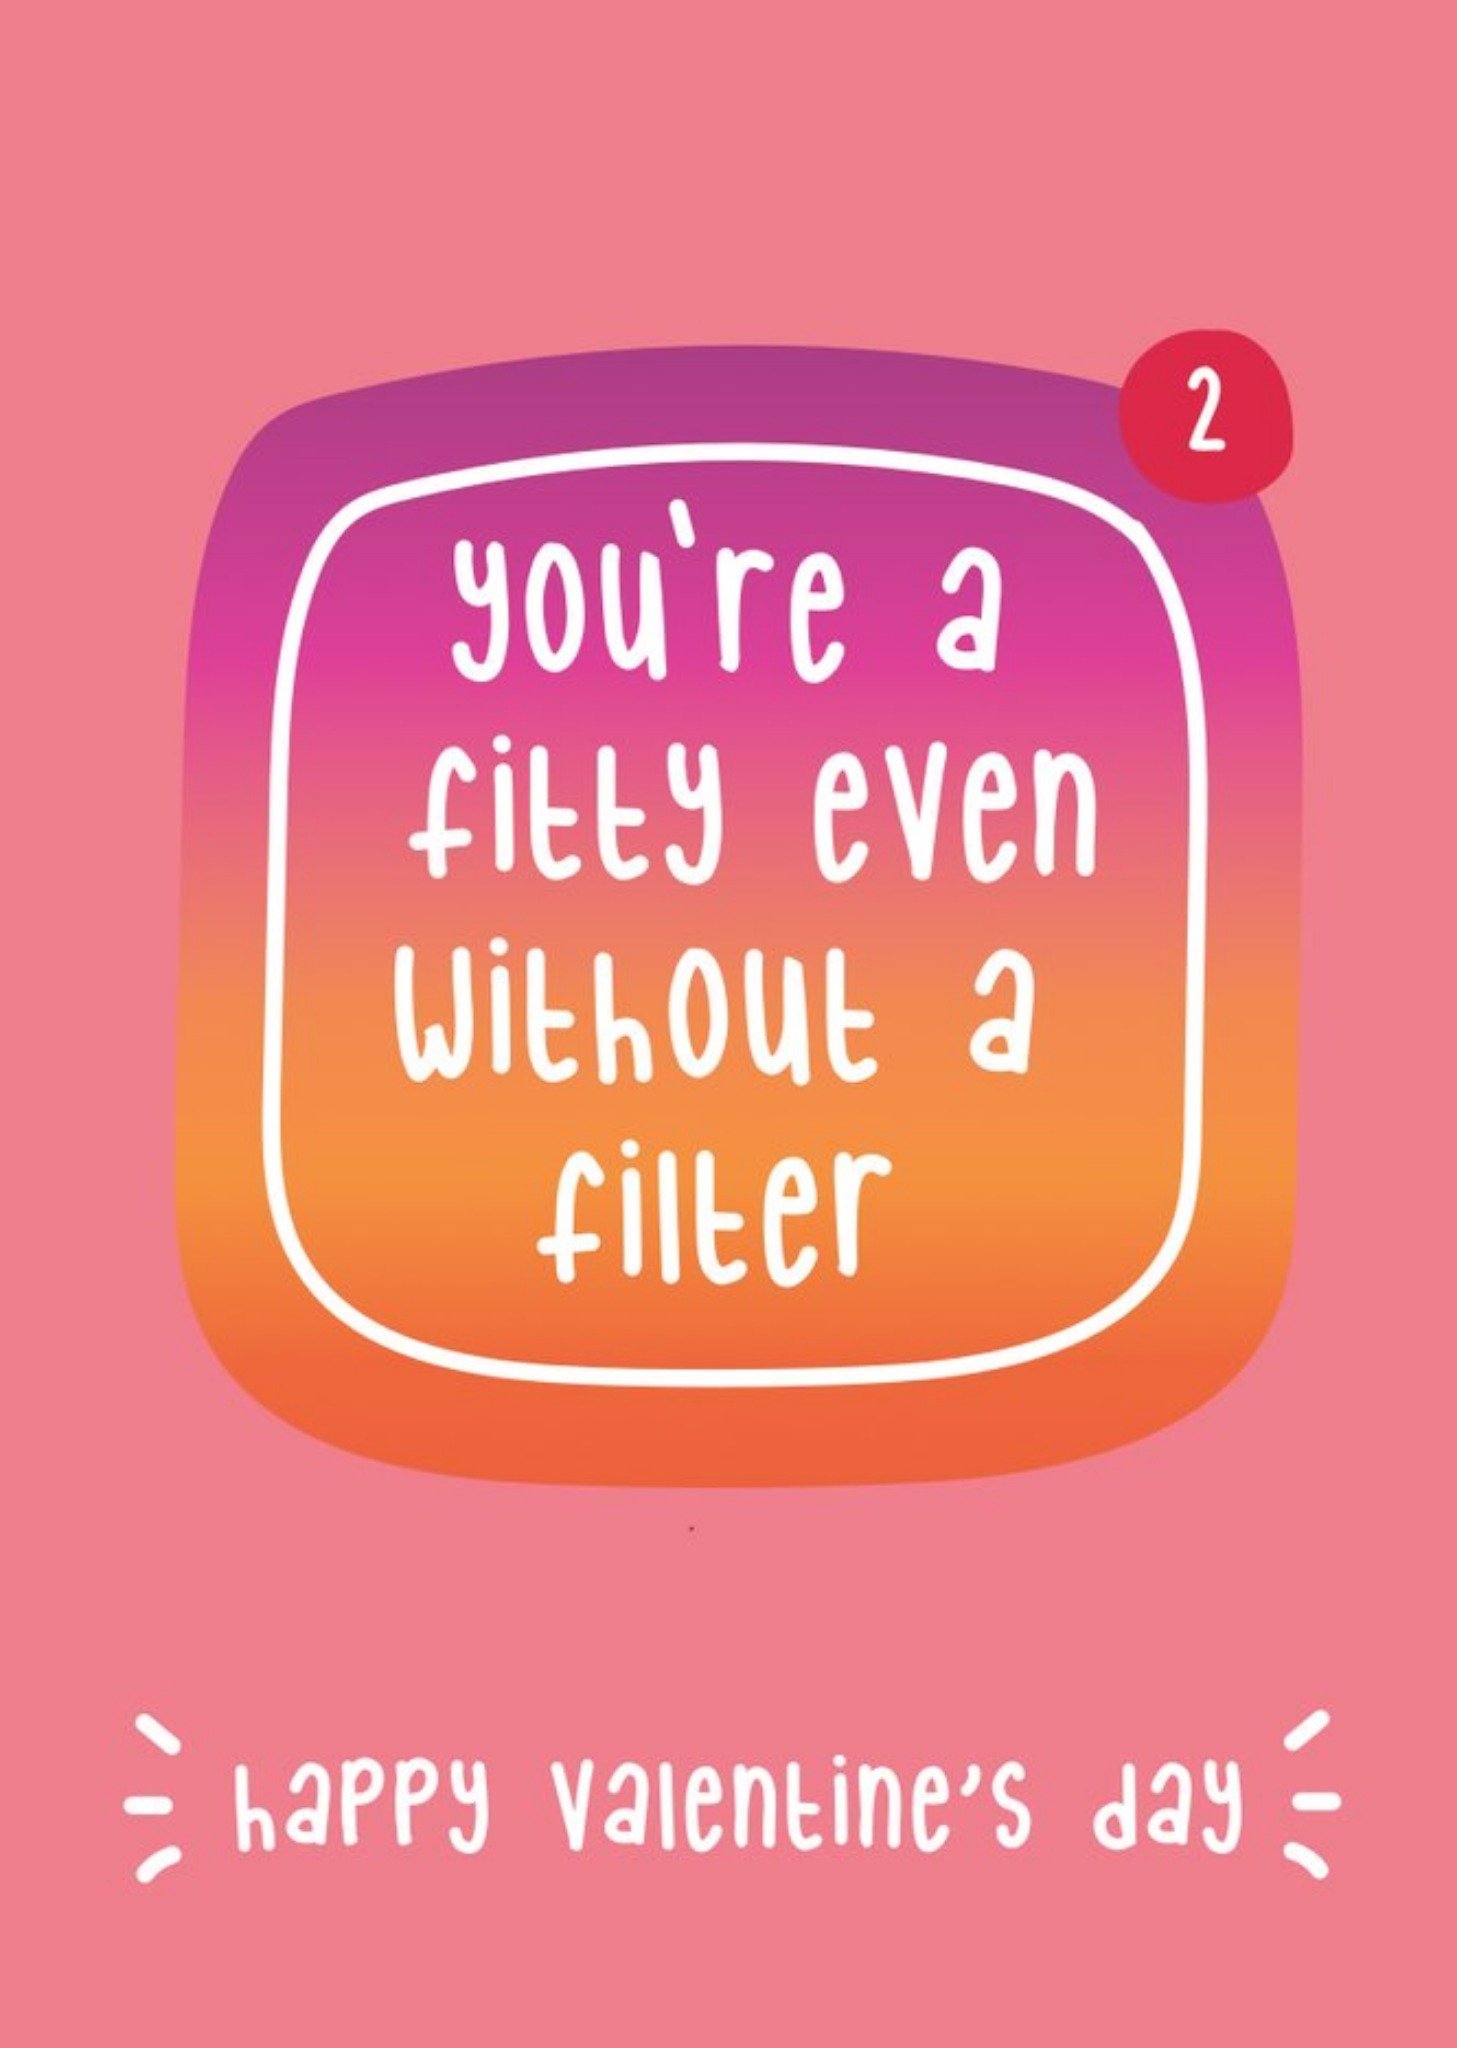 Moonpig Illustration Of An Instagram Themed Icon You Are A Fitty Even Without A Filter Valentines Da